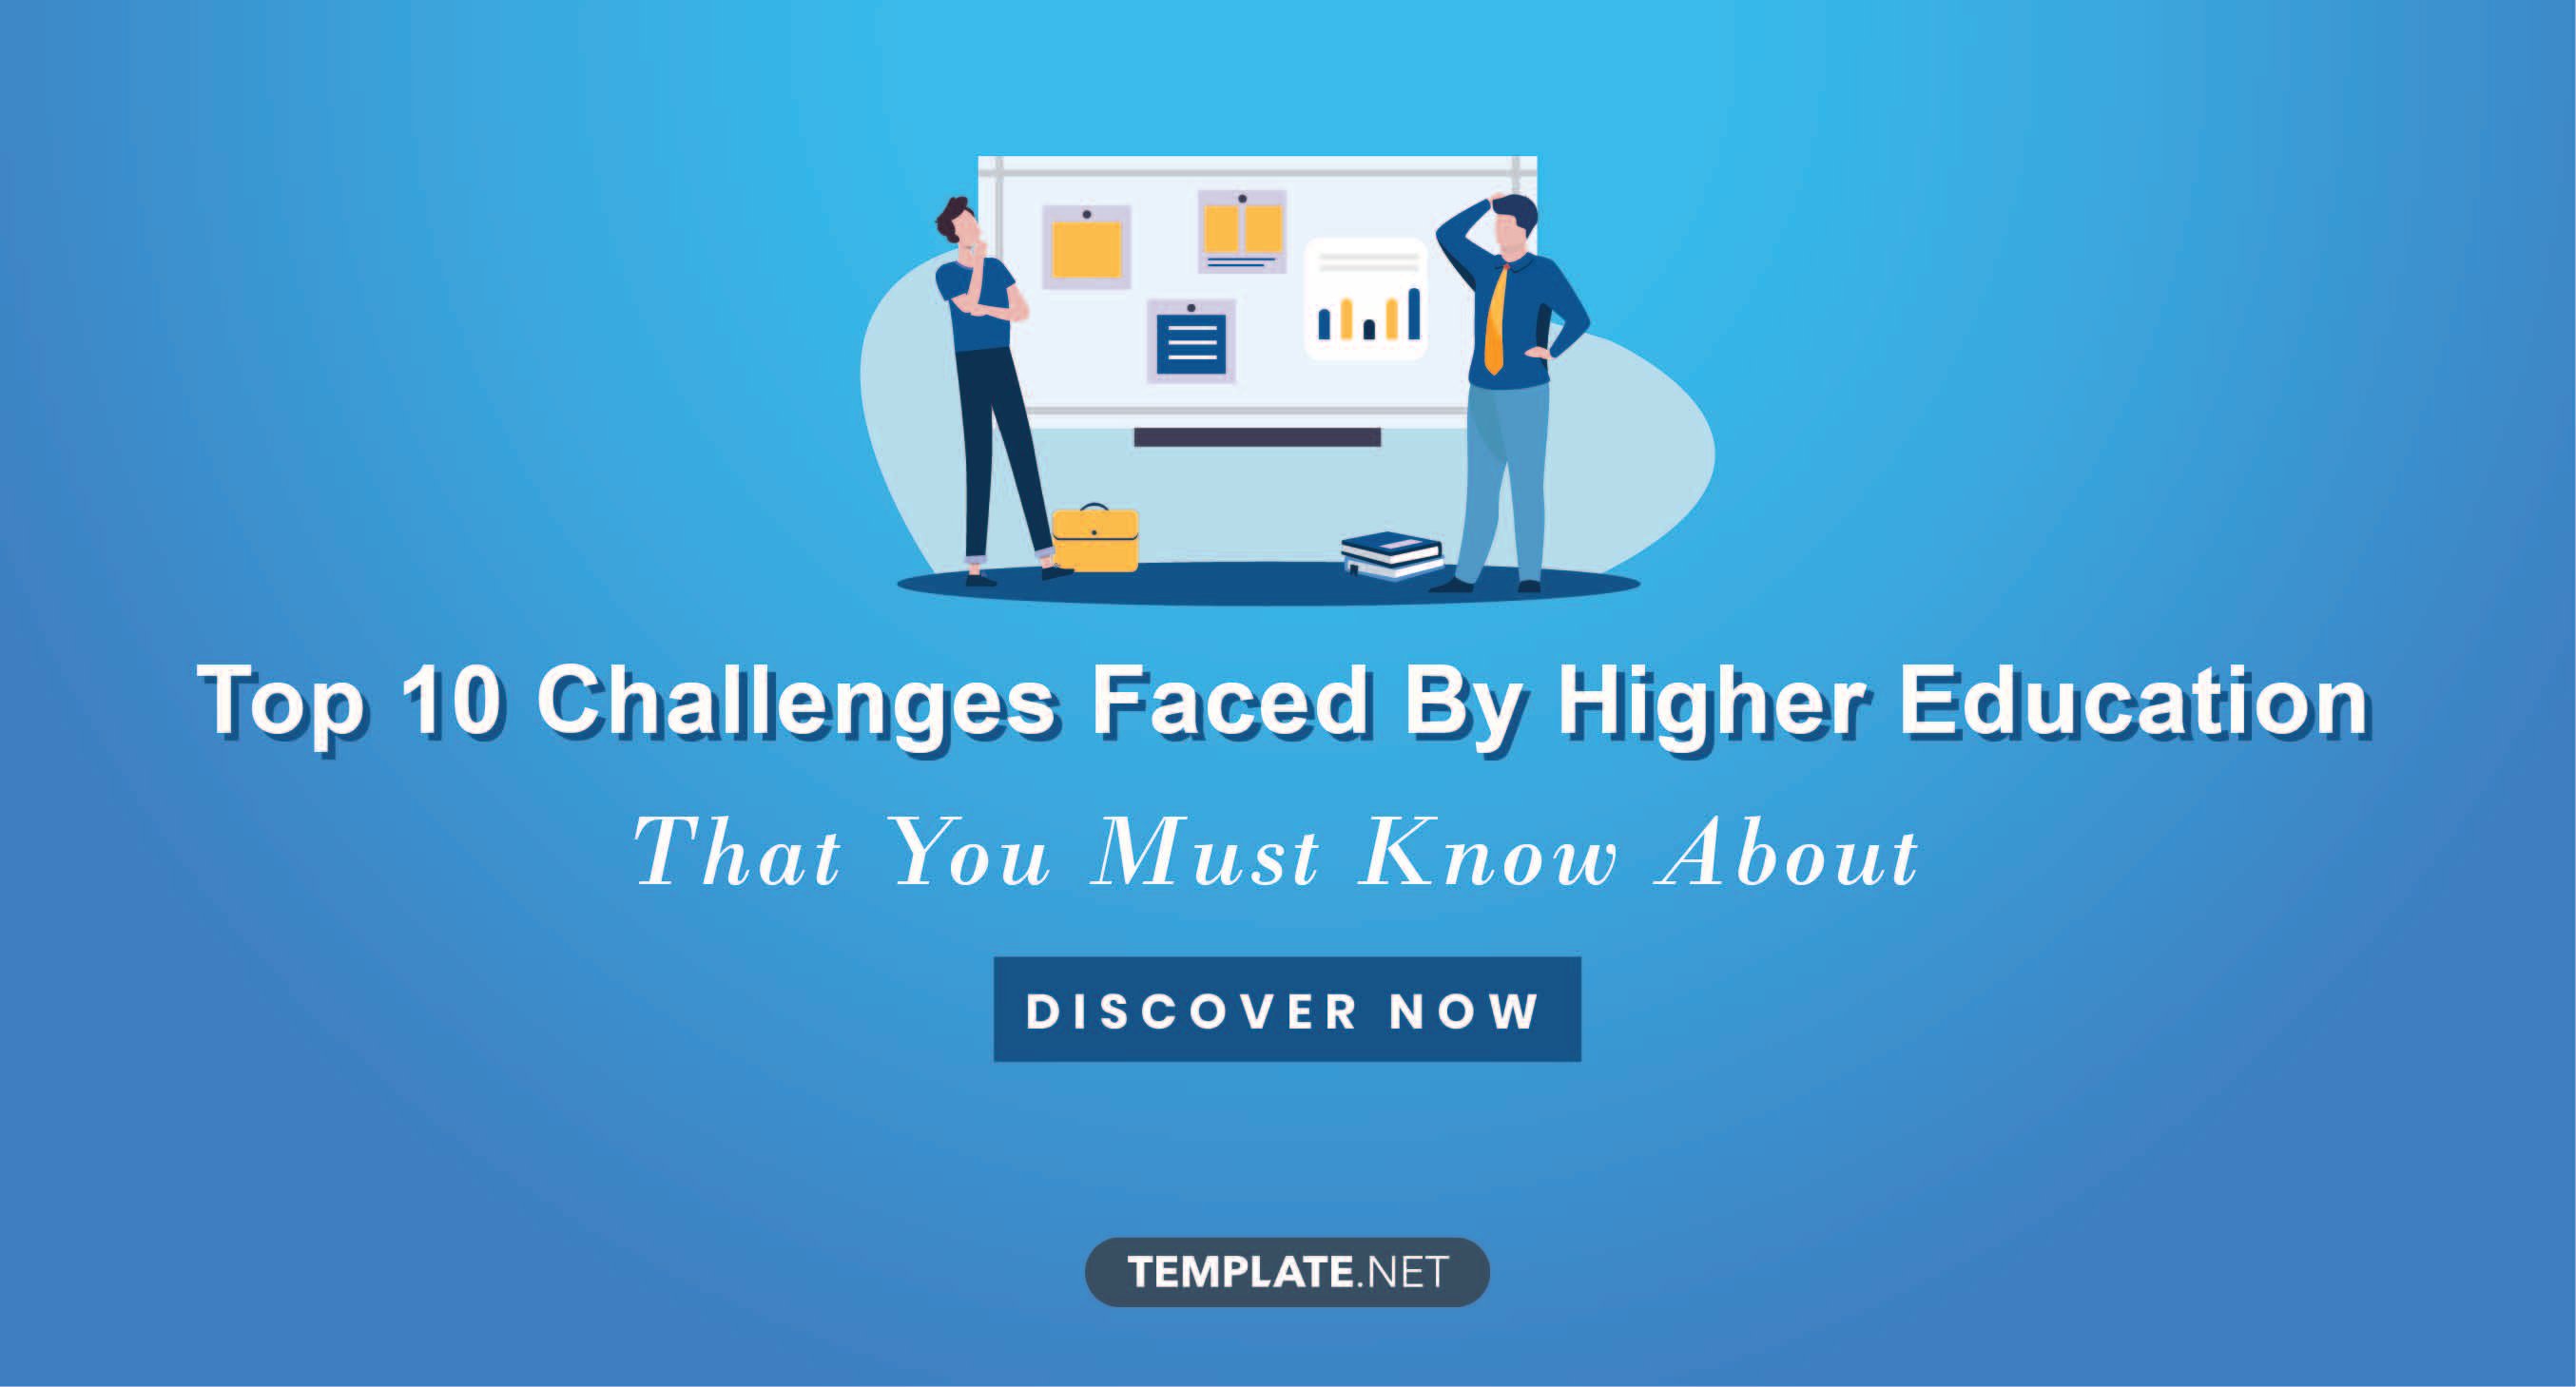 Top 10 Challenges Faced by Higher Education